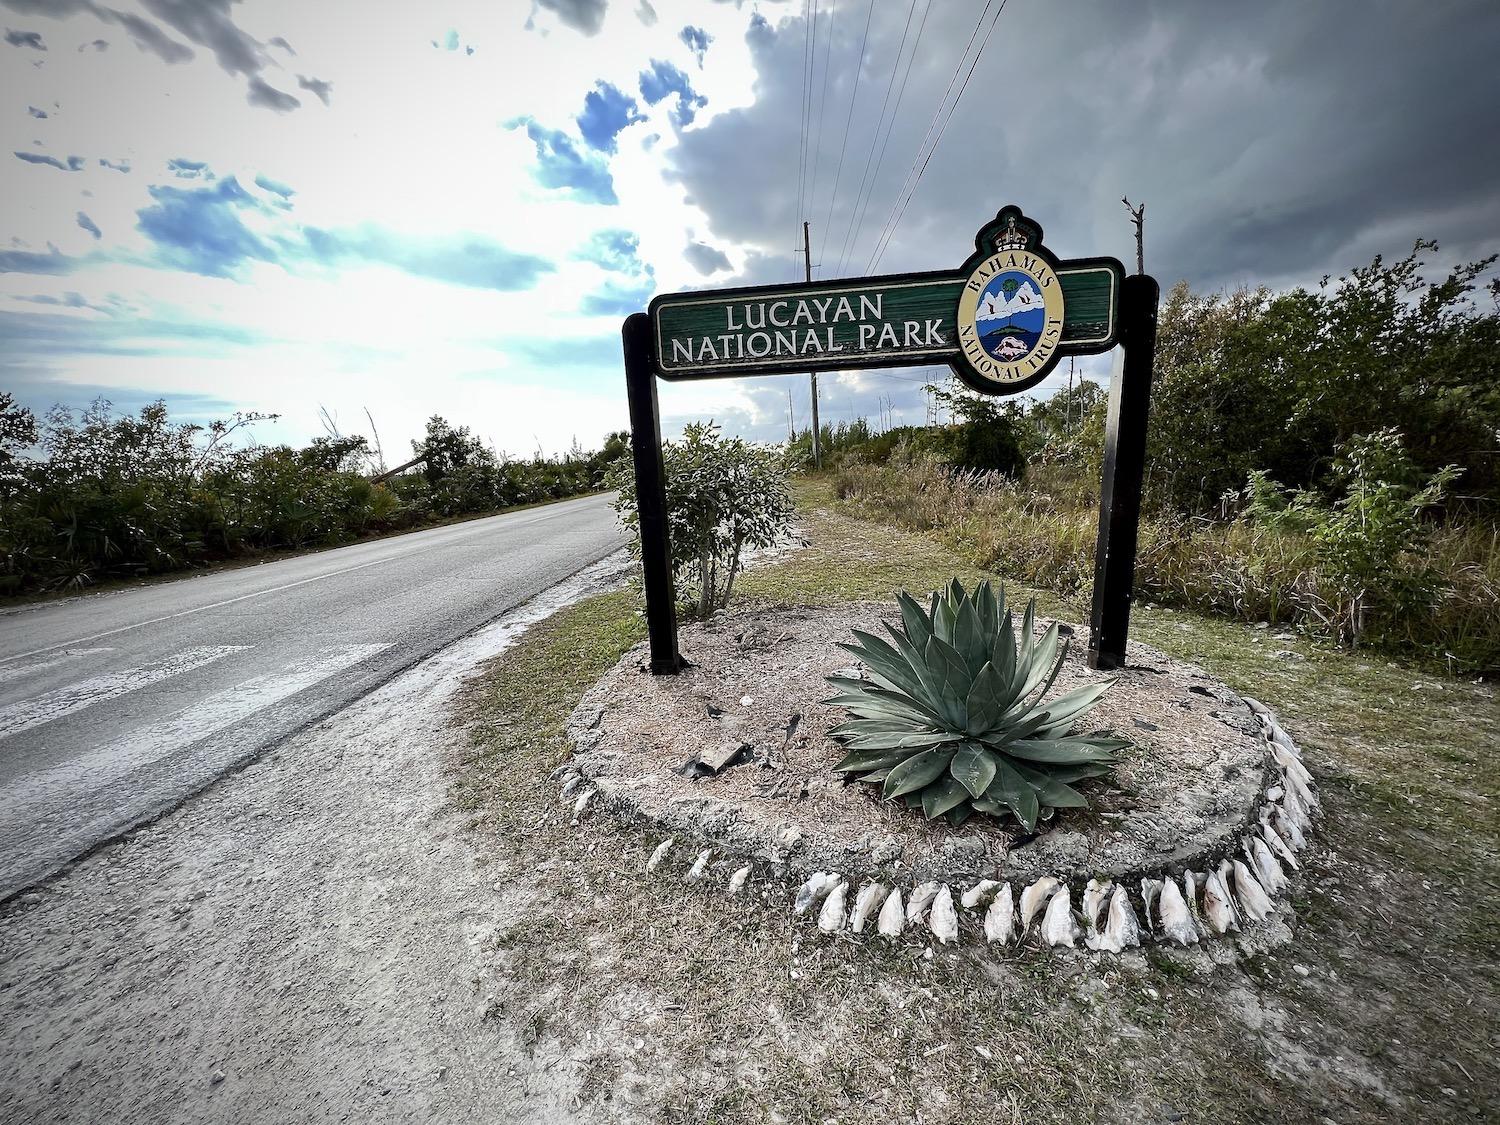 Lucayan National Park is found on both sides of the highway.